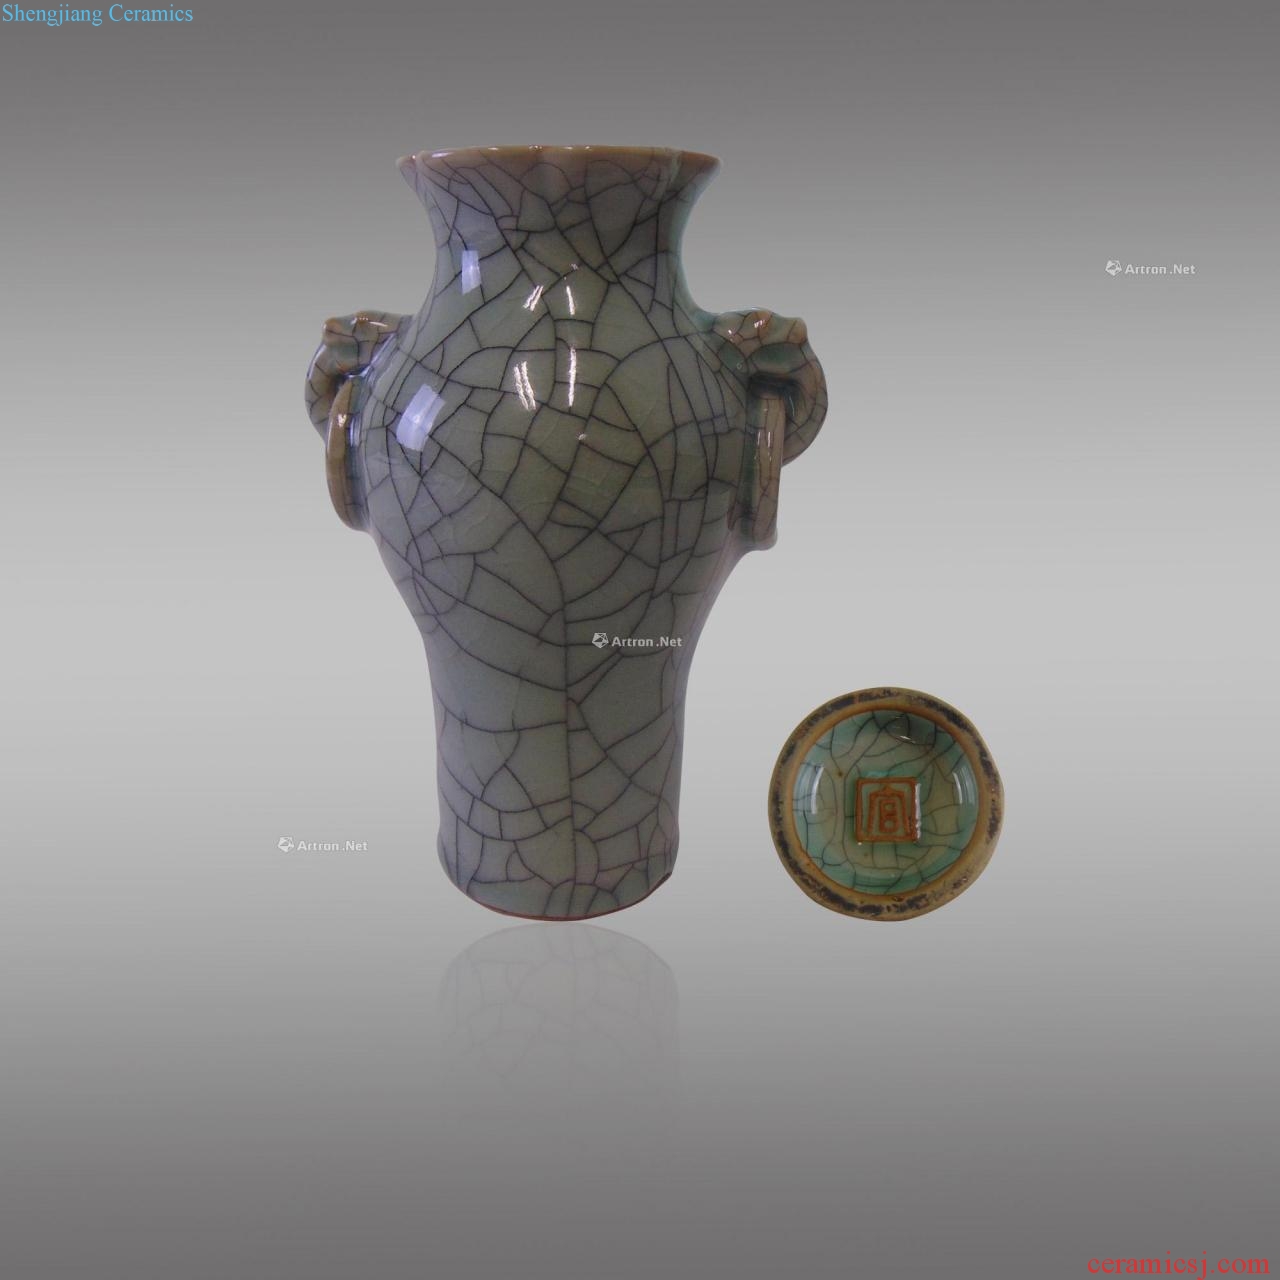 The song dynasty kiln ears lotus mouth bottle